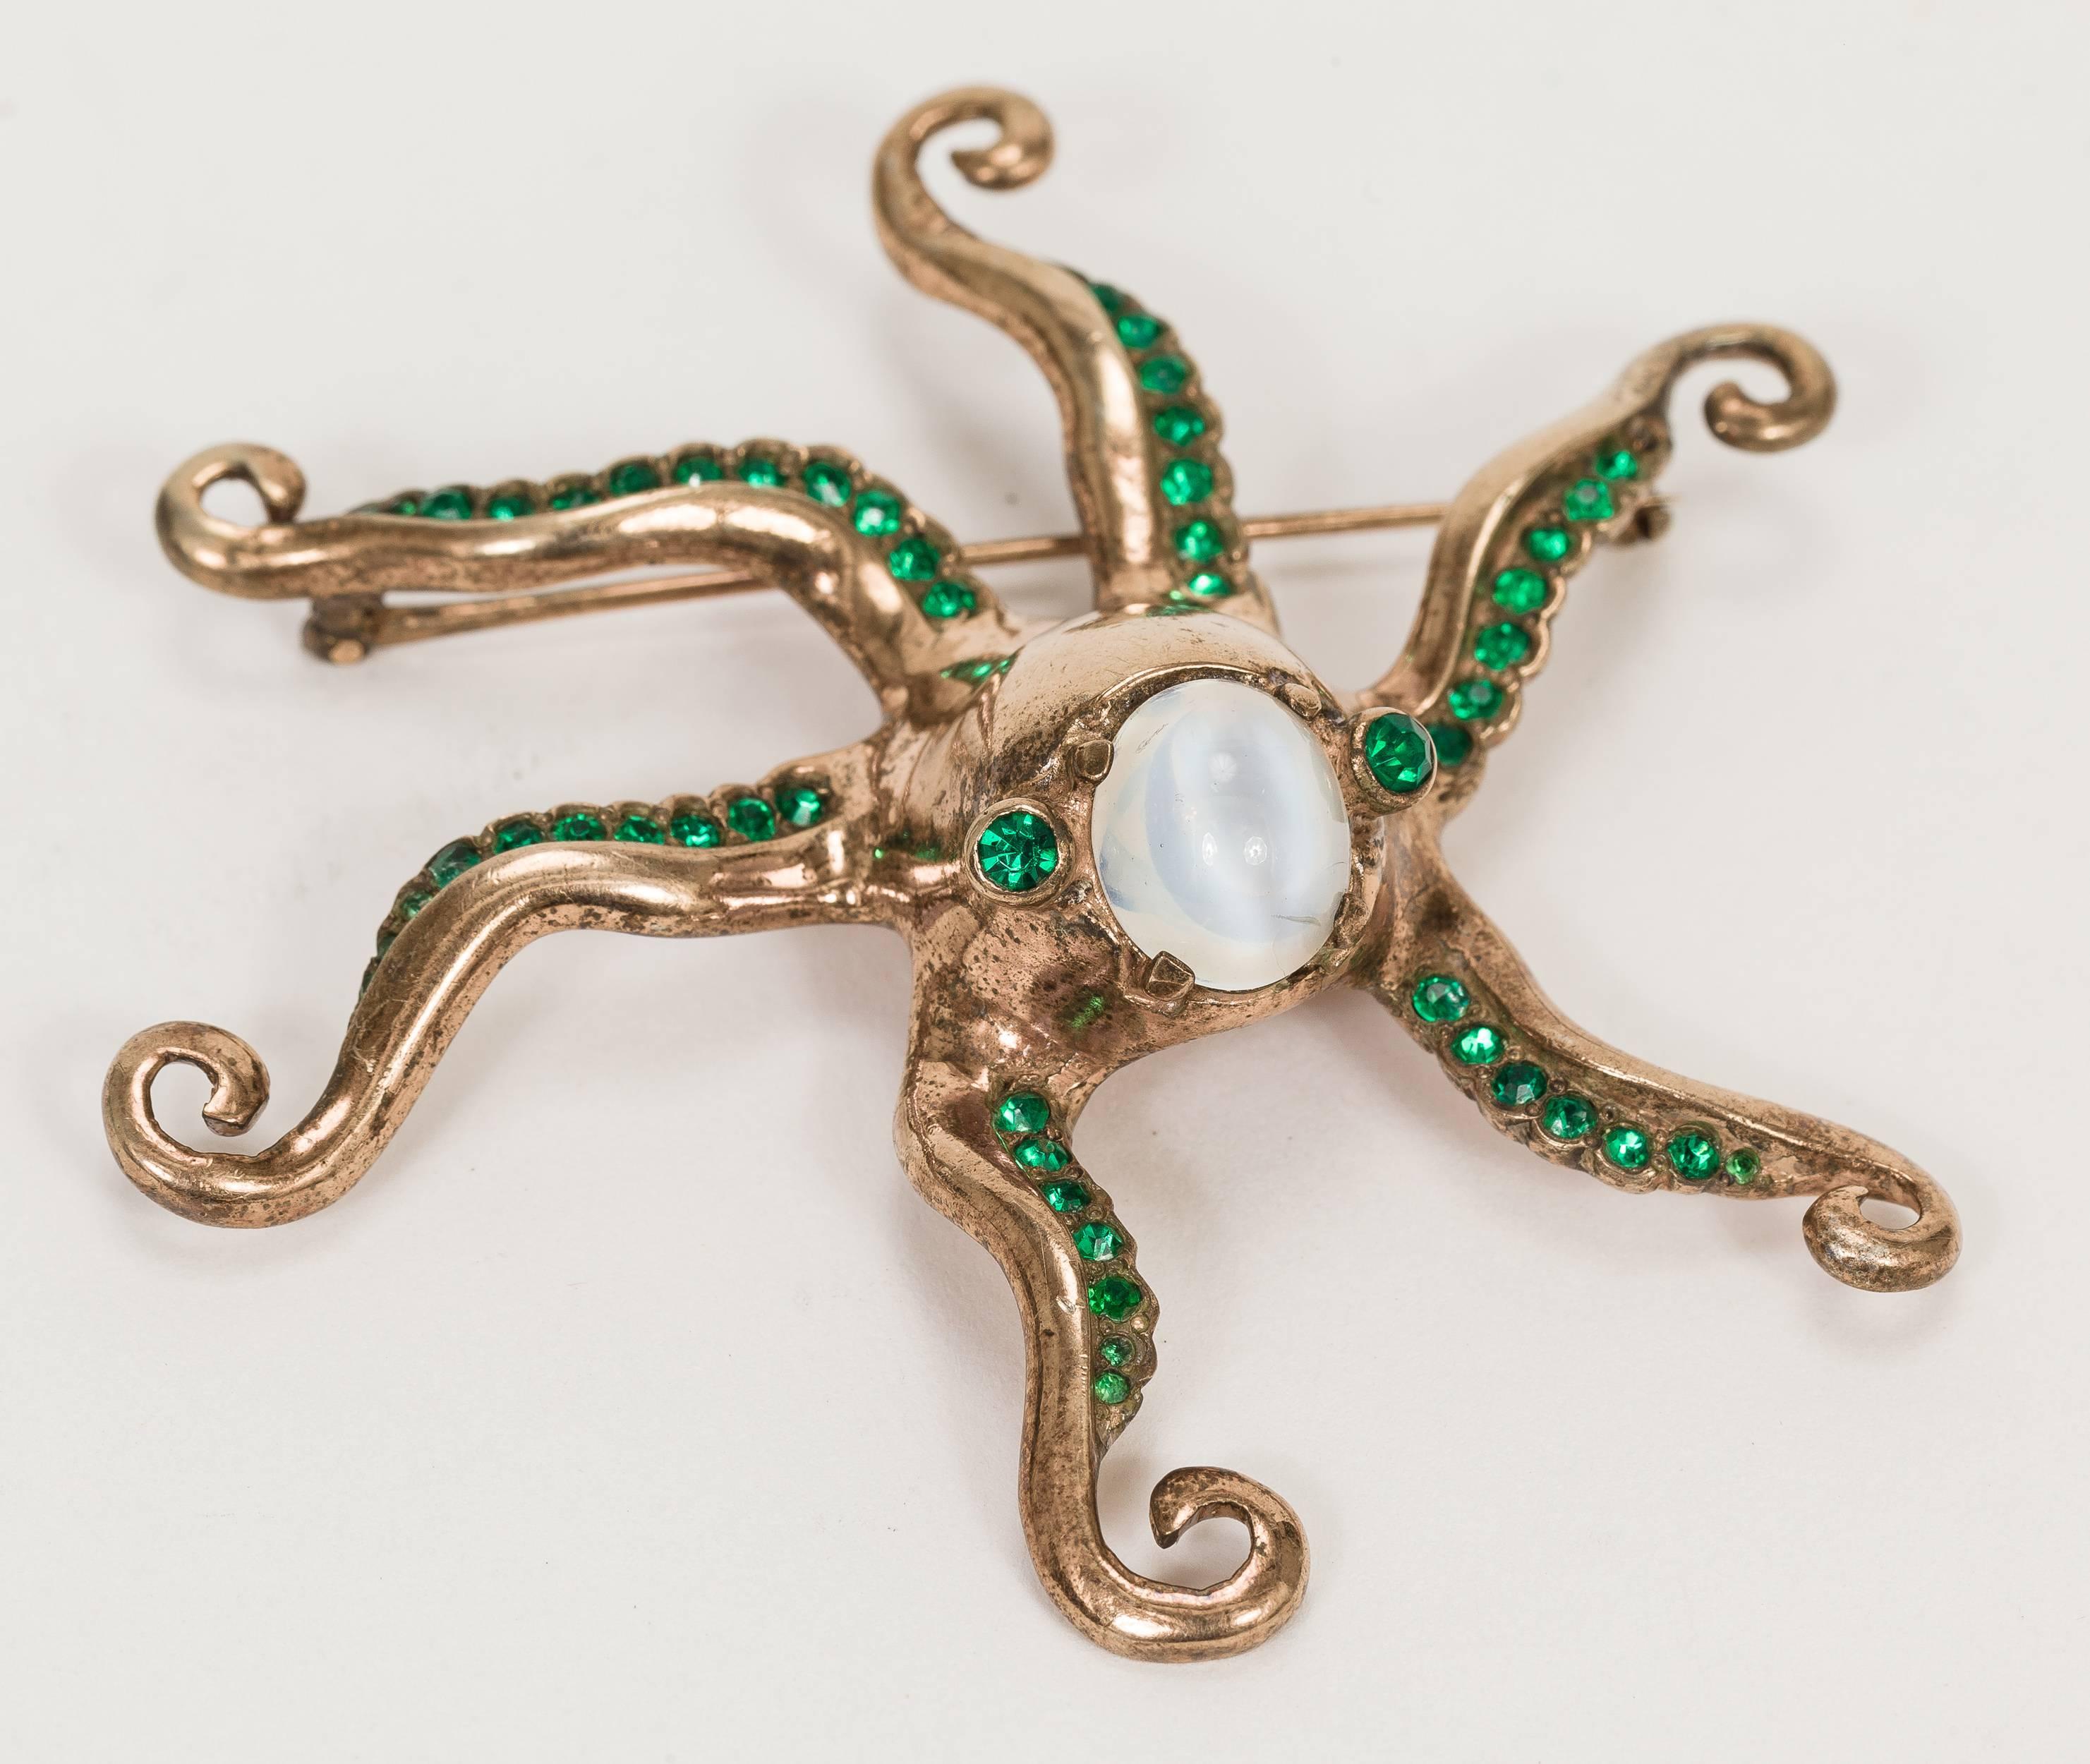 Nettie Rosenstein rose gold-plated over sterling base metal octopus pin, circa 1940. This beautiful aquatic creature has a simulated opaline cabochon head and emerald green rhinestone eyes and each of the octopus' six arms have emerald green